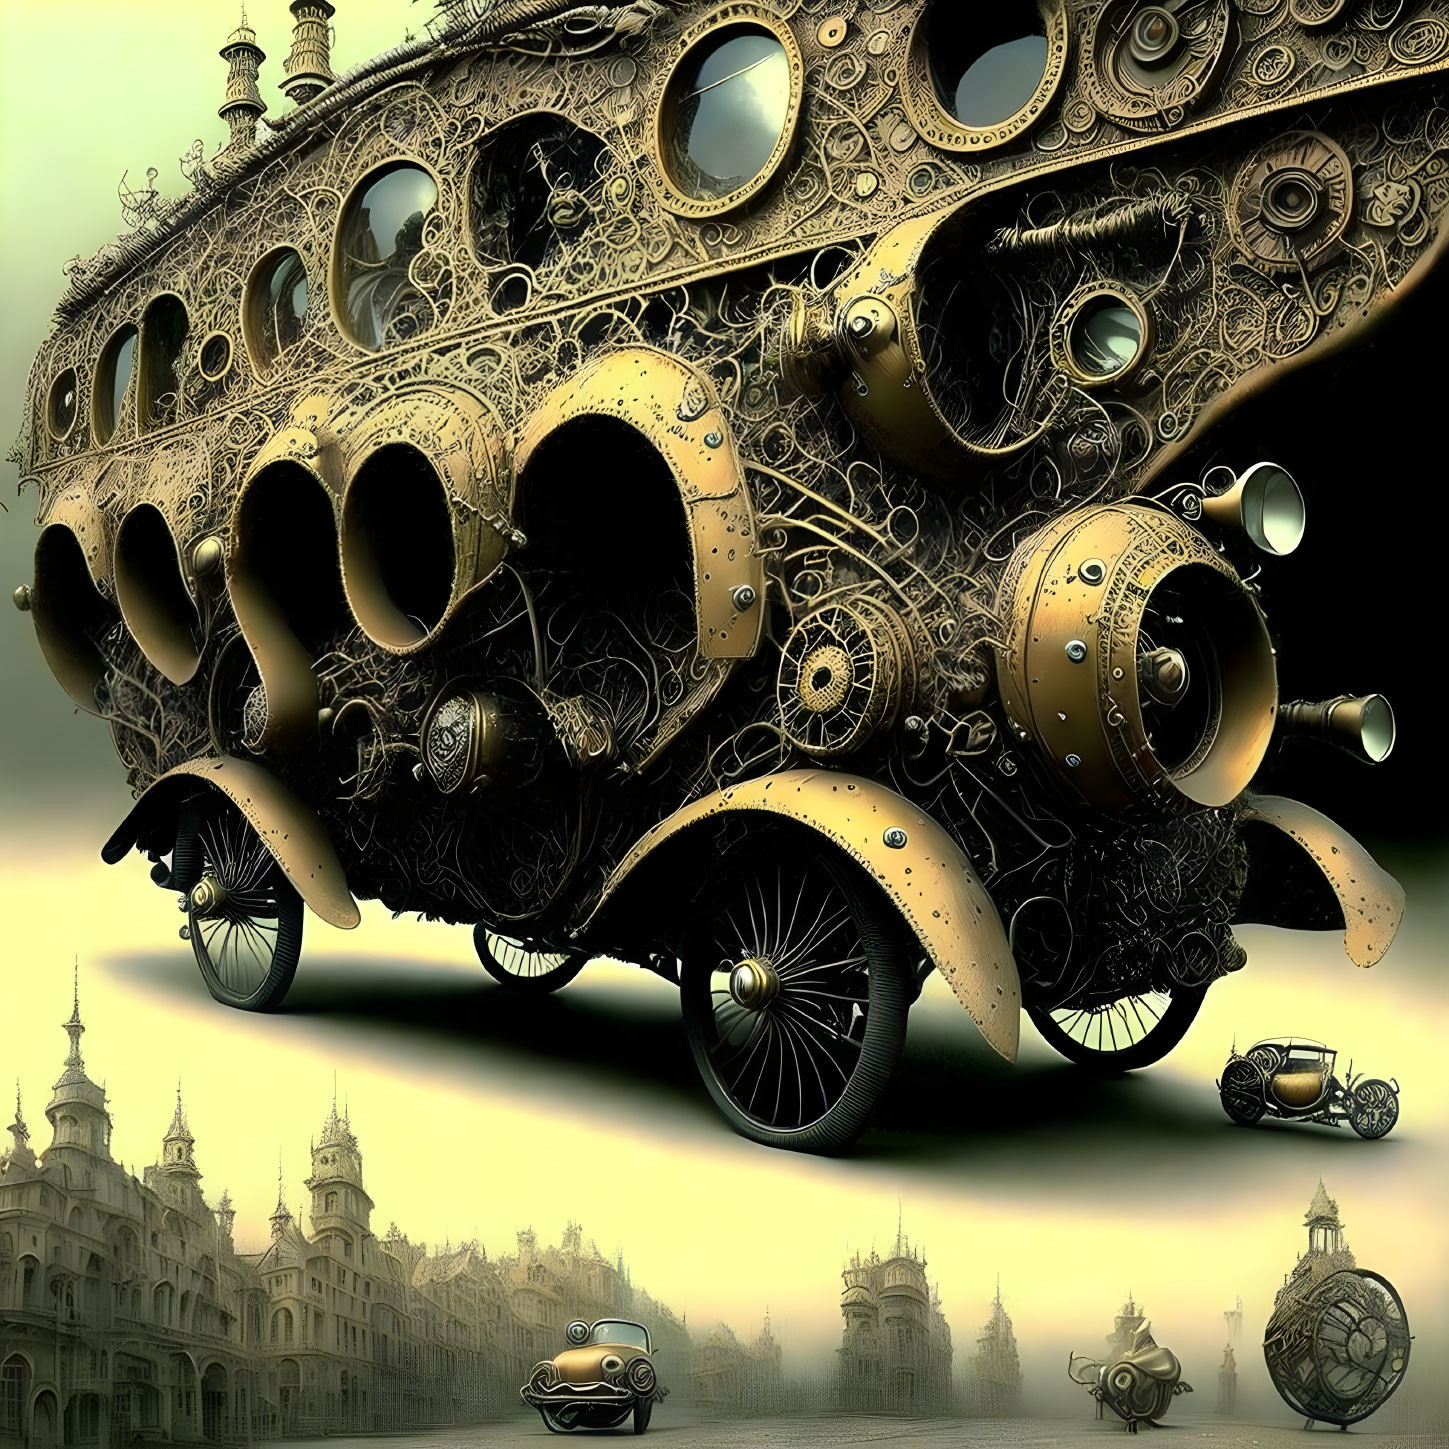 Fantastical vehicle with ornate gears and circular windows in intricate design